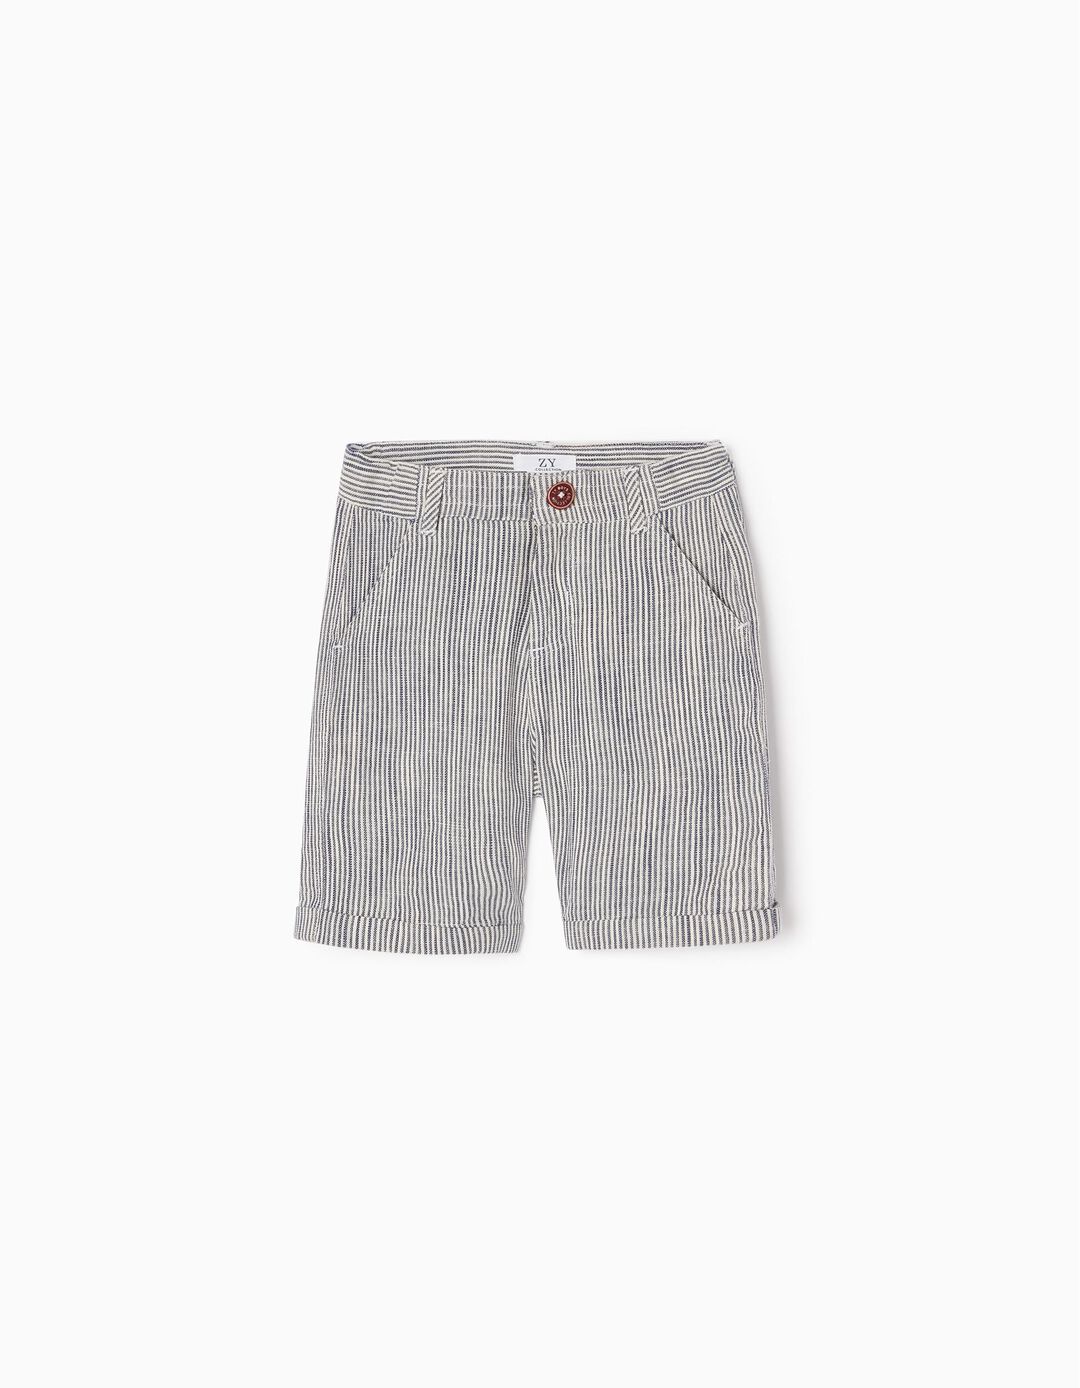 Striped Cotton and Linen Shorts for Boys, White/Blue